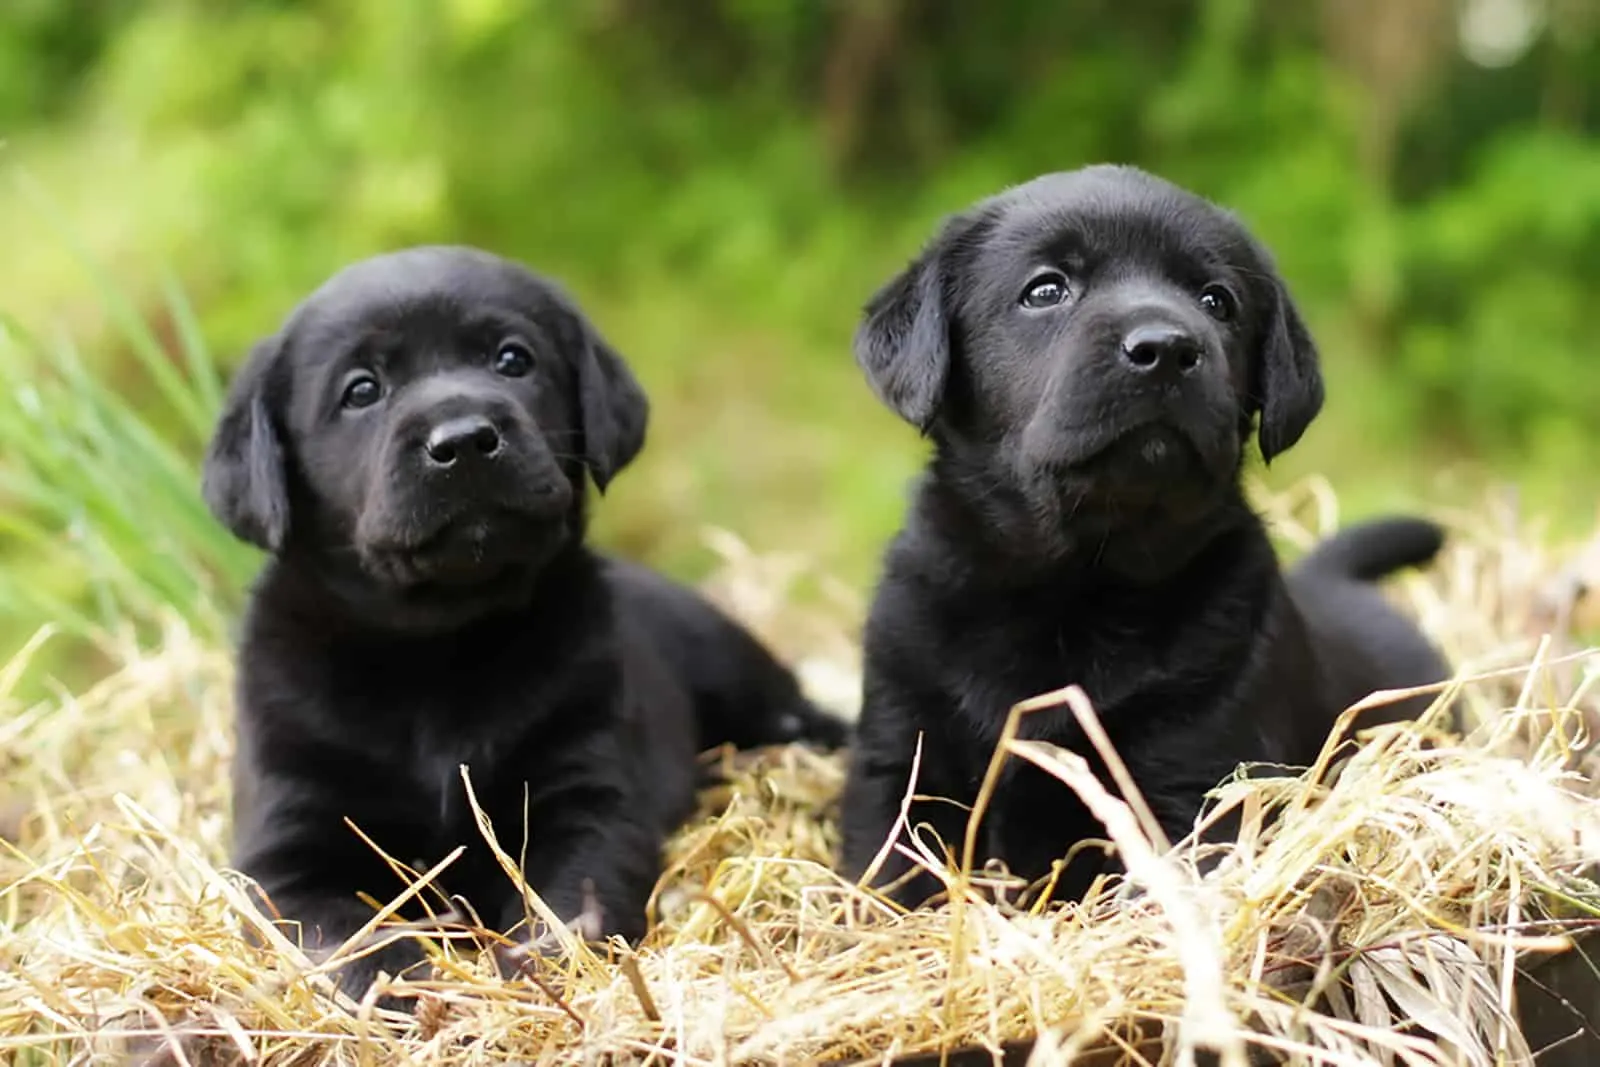 two black labrador puppies sitting in the straw